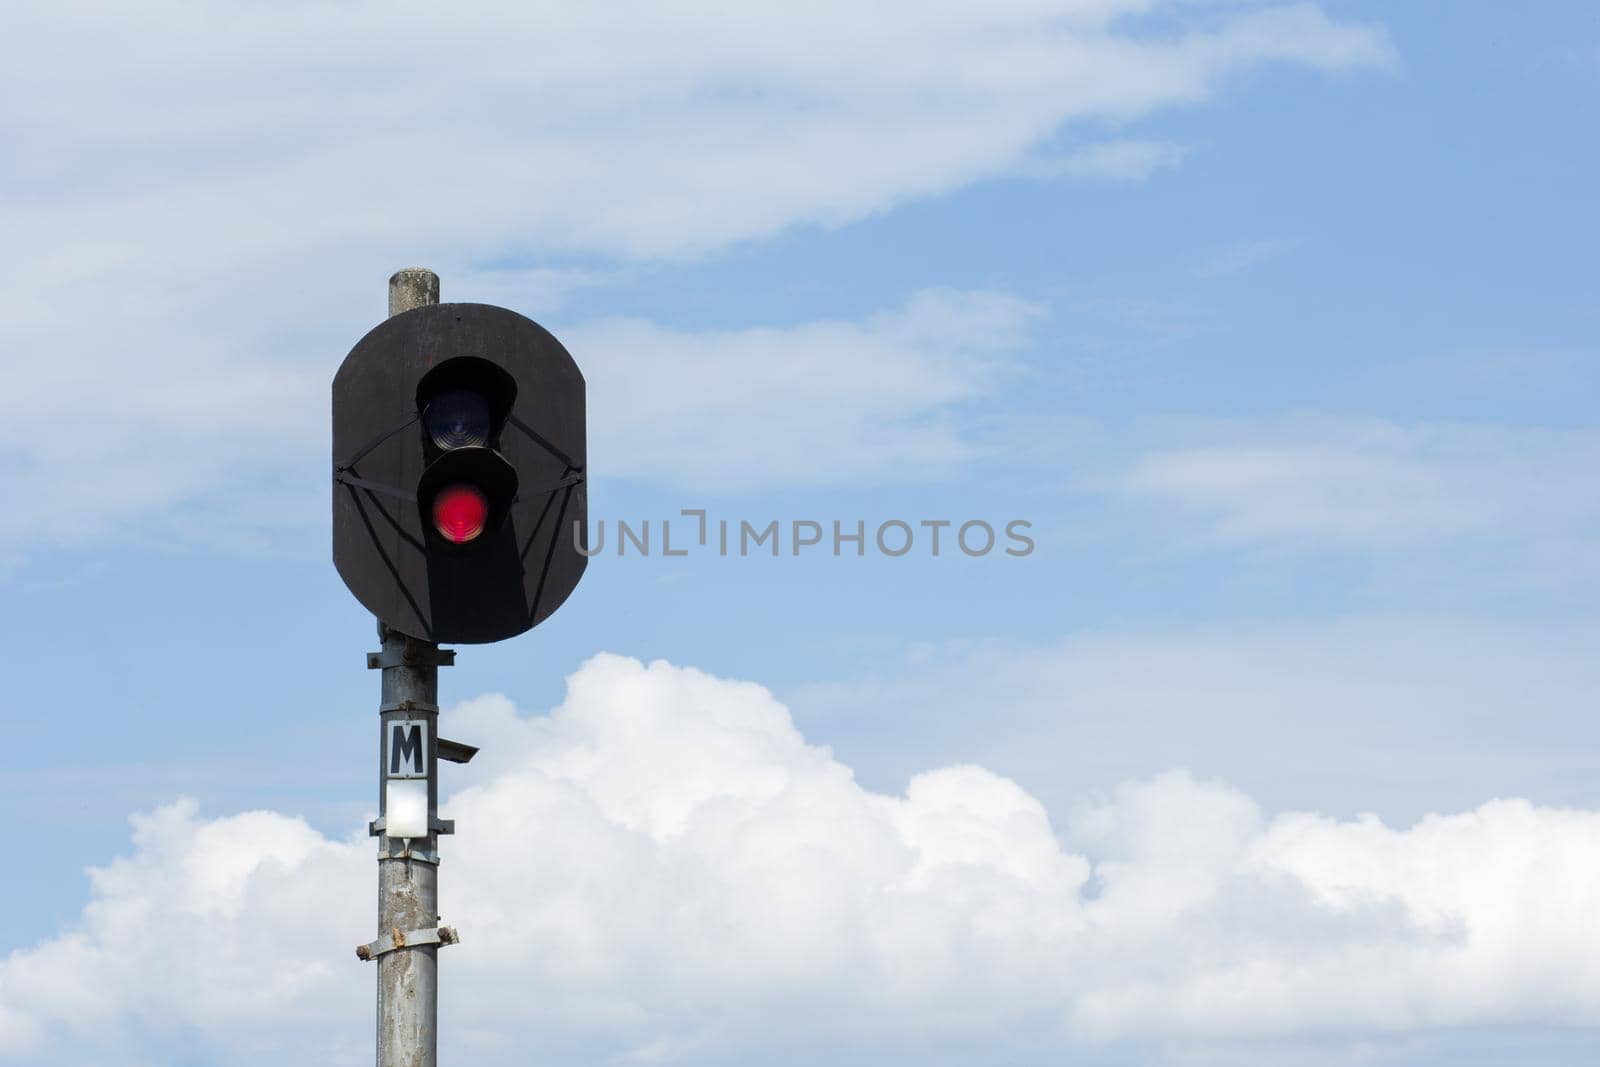 Two-aspect colour light railway signal with displayed red light set at danger and to stop over blue sky